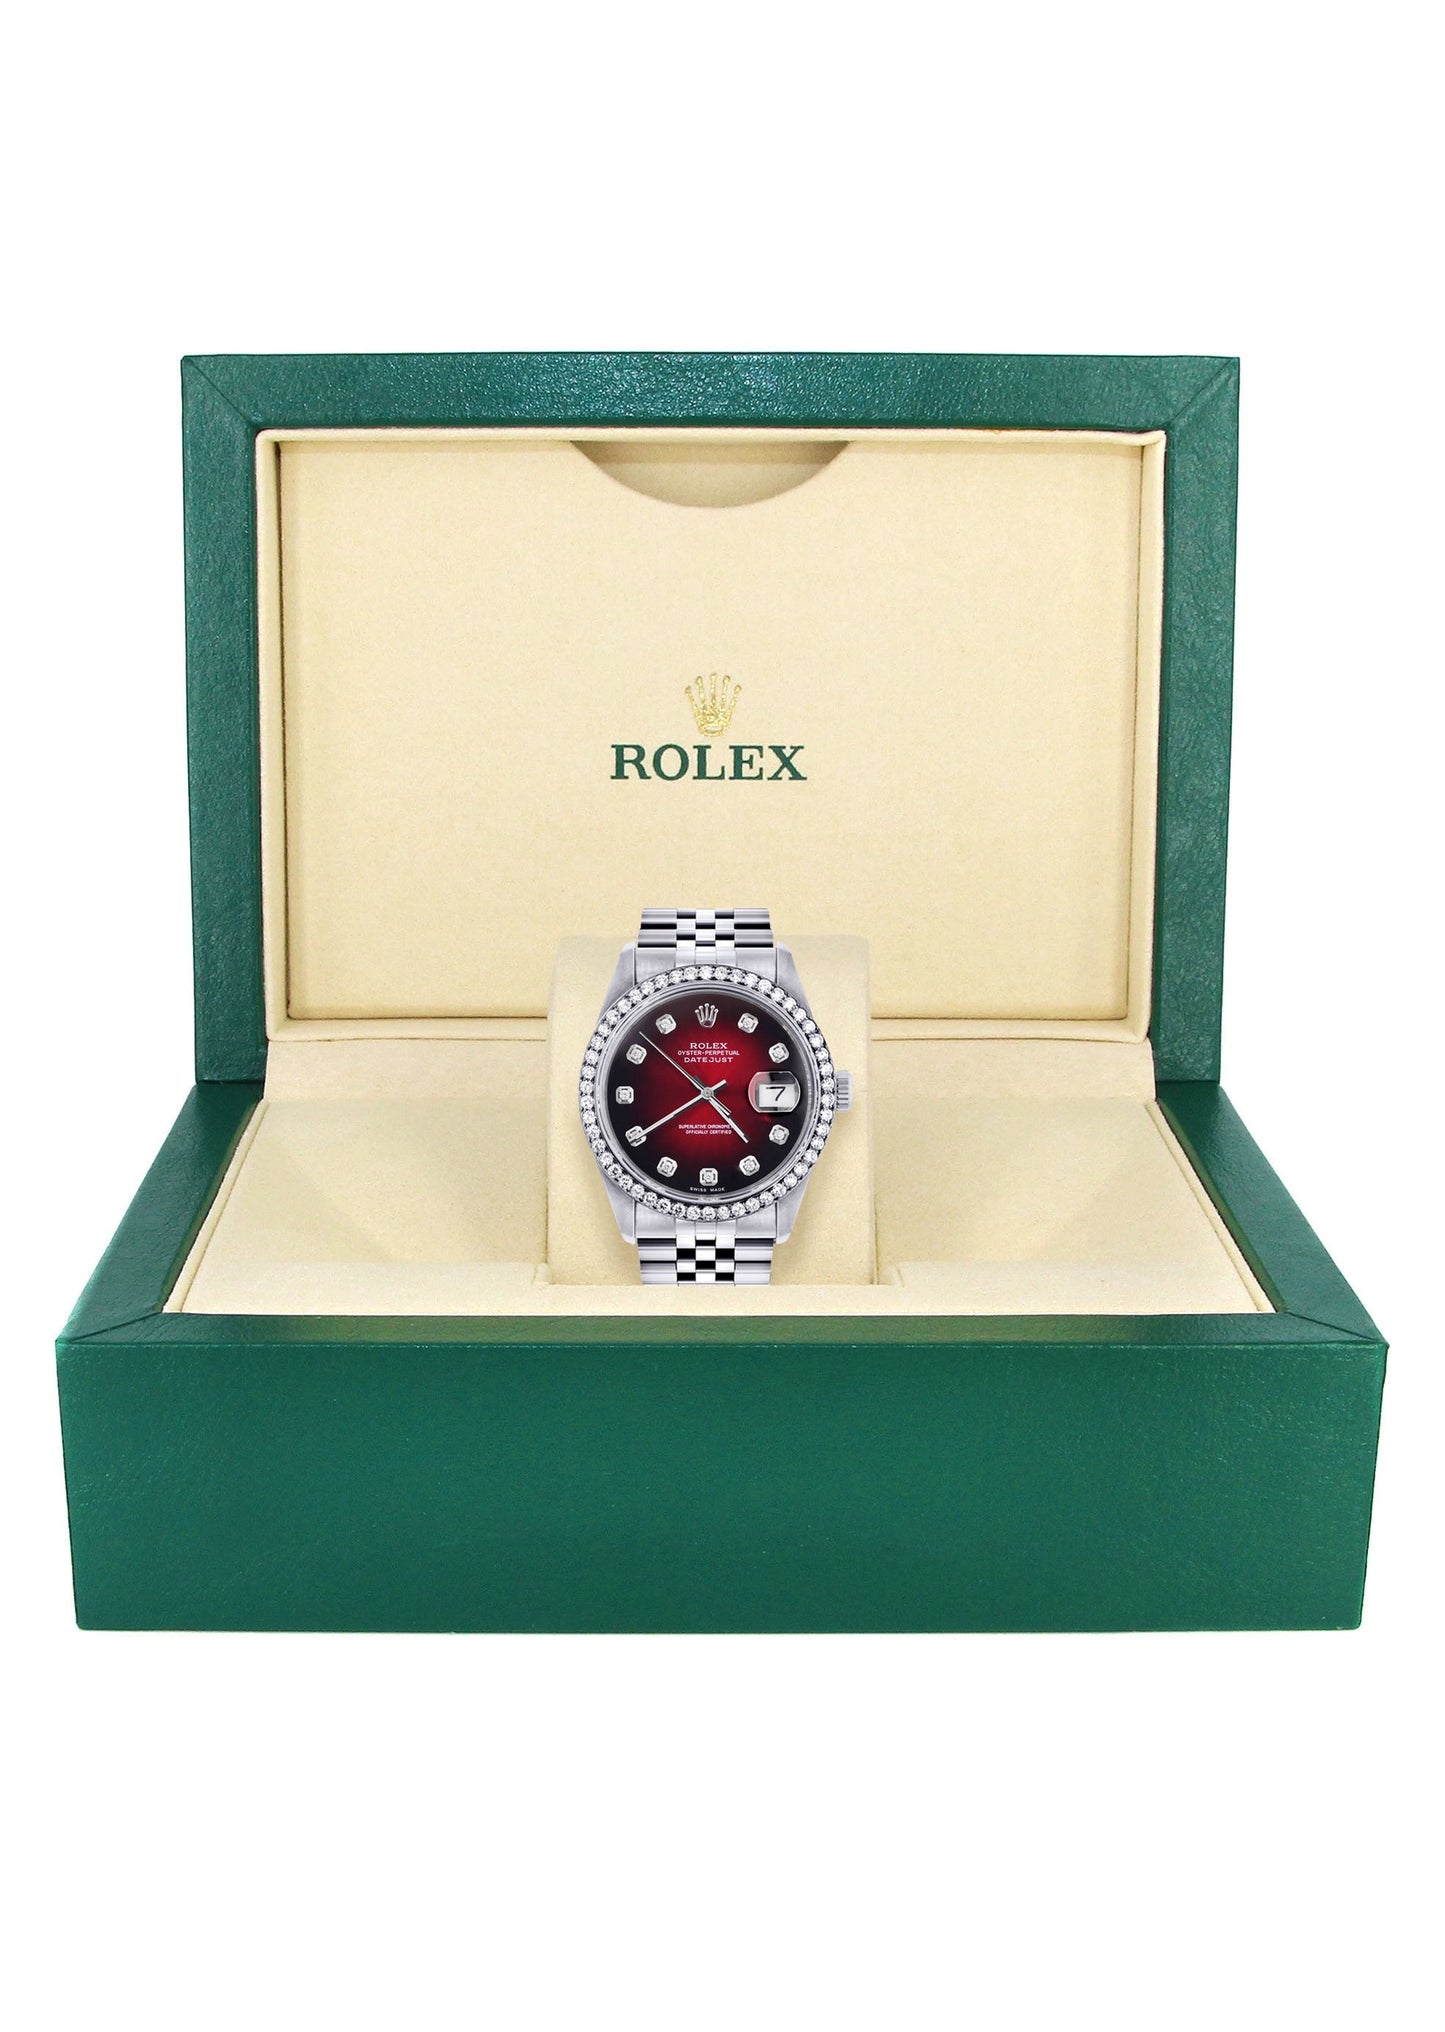 Rolex Datejust Watch | 16200 | 36MM | Red Dial | Jubilee Band | Stainless Steel